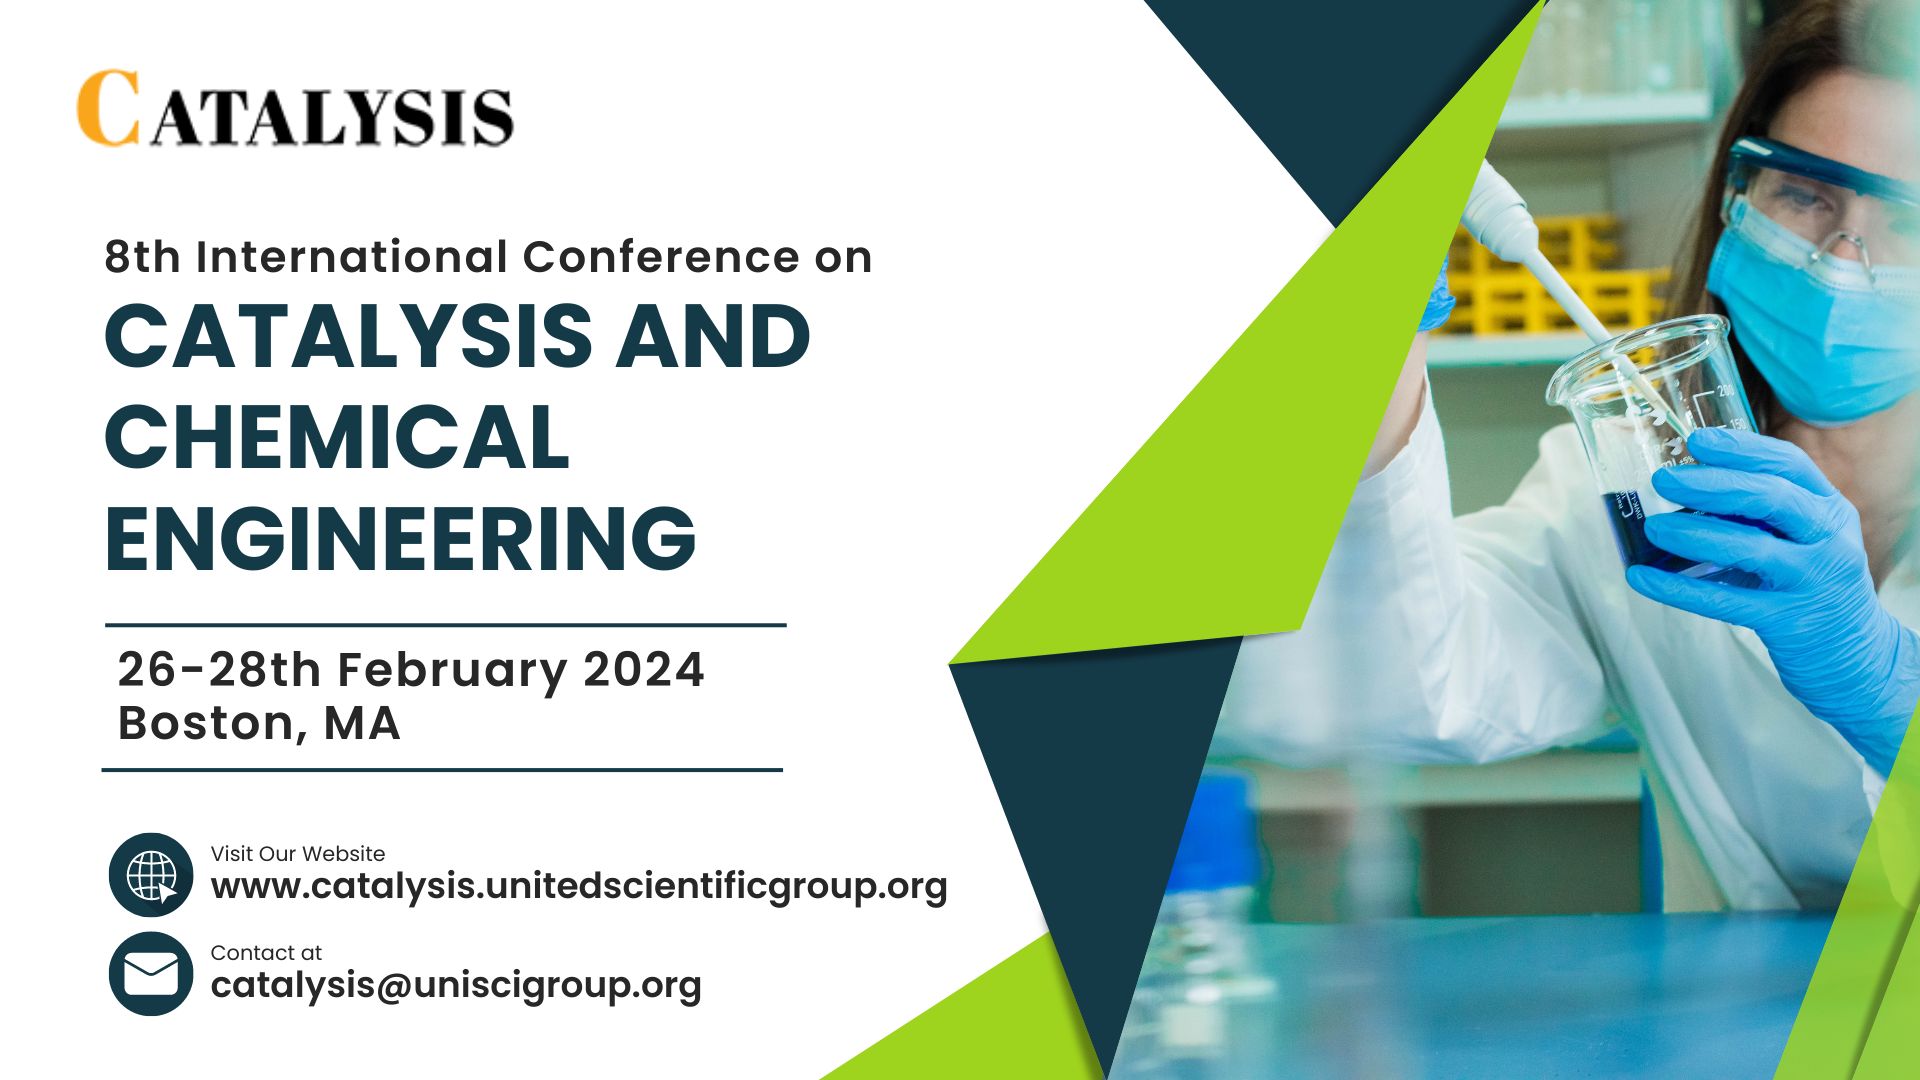 8th International Conference on Catalysis and Chemical Engineering, Boston, Massachusetts, United States